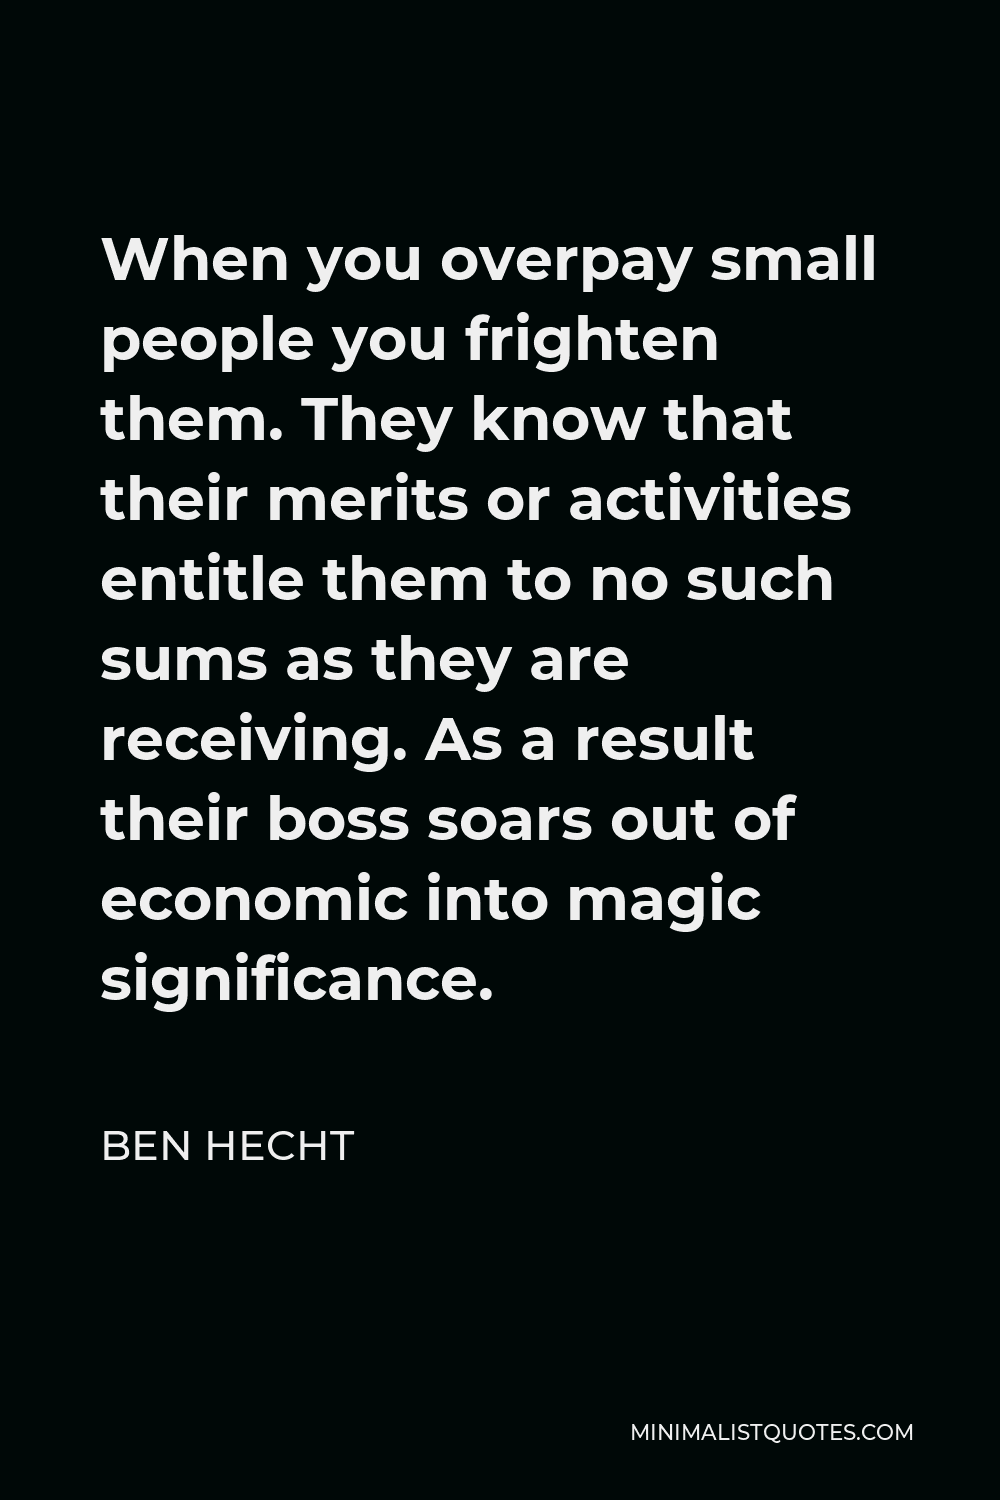 Ben Hecht Quote - When you overpay small people you frighten them. They know that their merits or activities entitle them to no such sums as they are receiving. As a result their boss soars out of economic into magic significance.